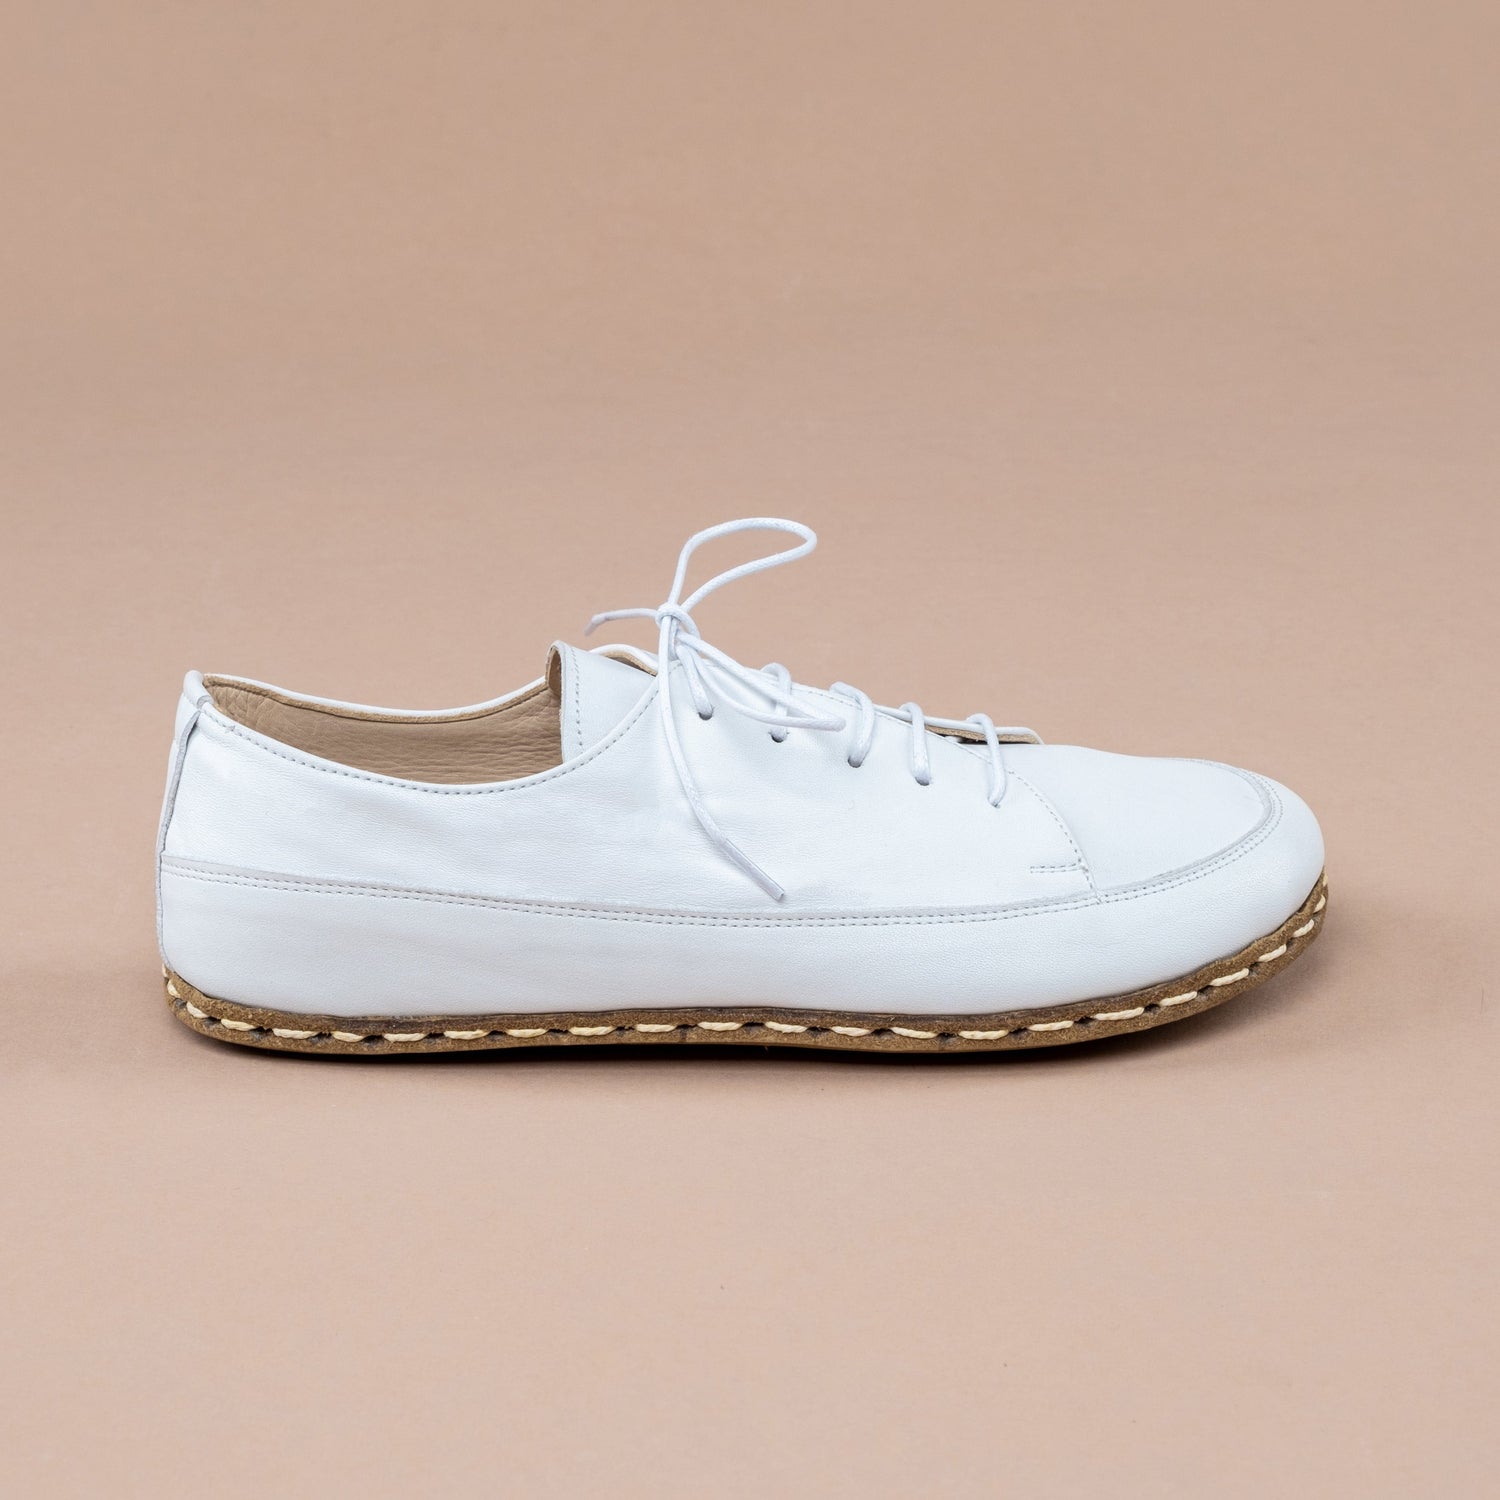 Women's White Sneakers - Turkish Sport Barefoot Shoes for Women ...